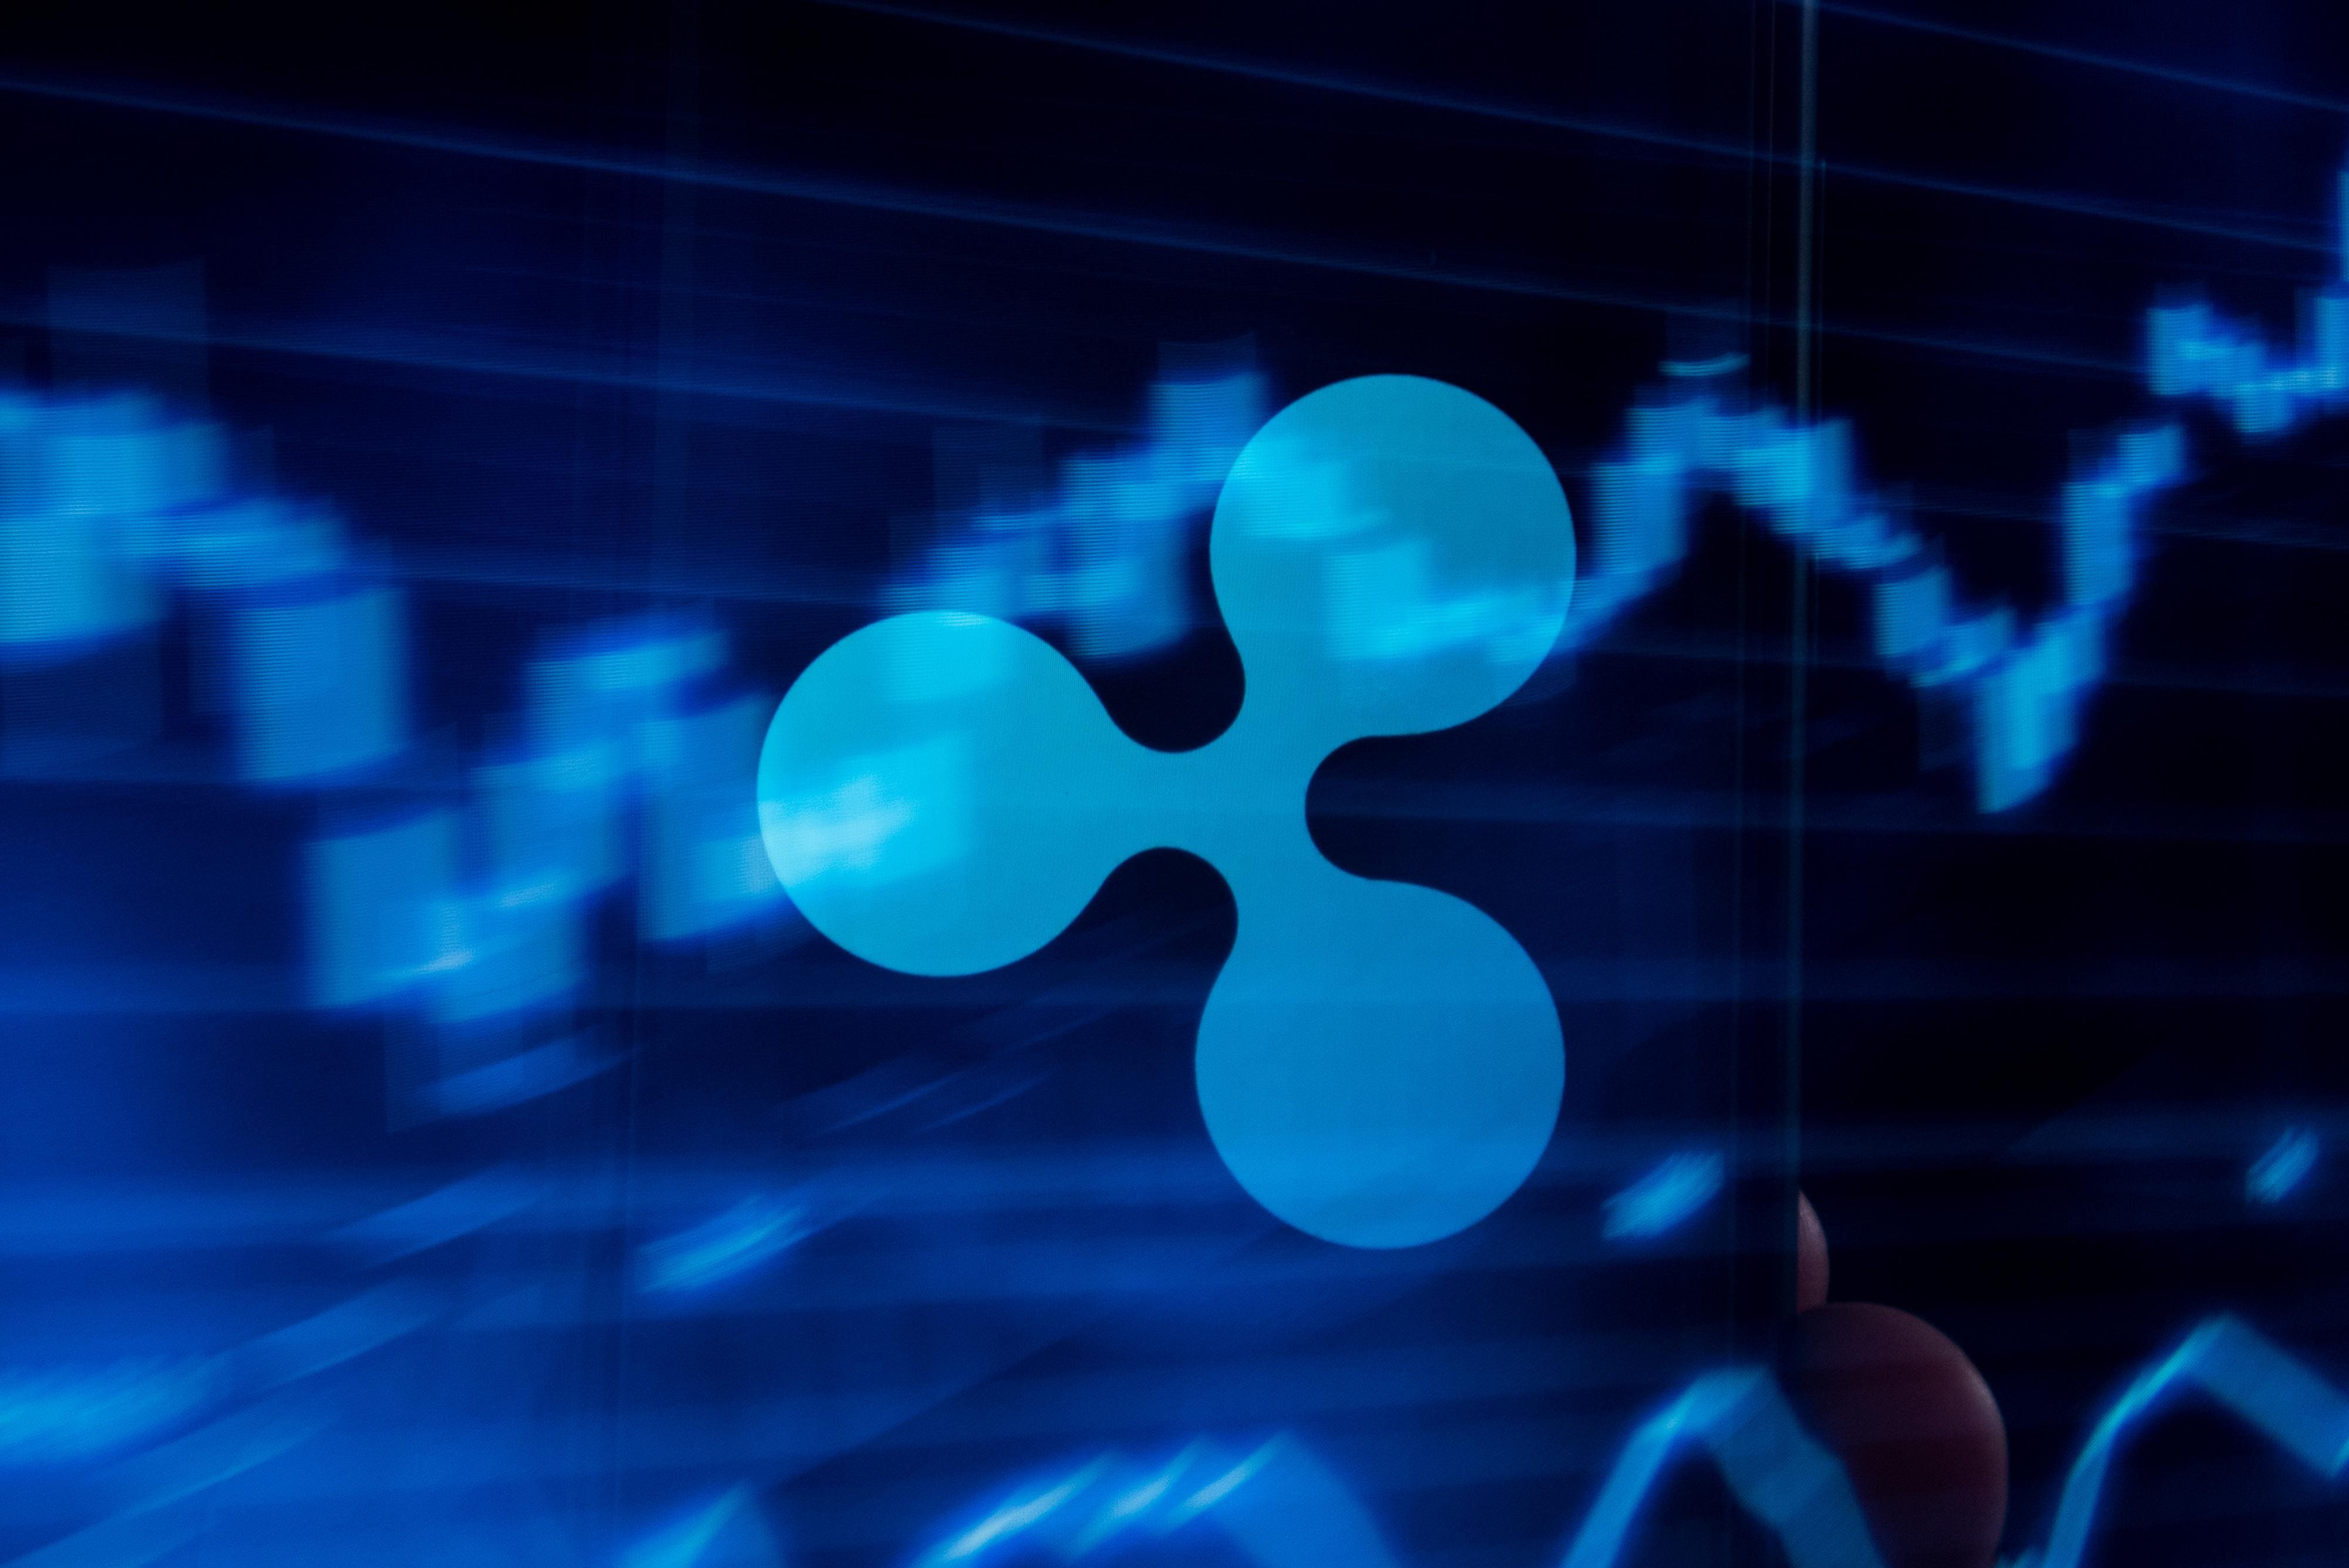 Will XRP Pump or Dump this Ripple Swell ? | XRP Price